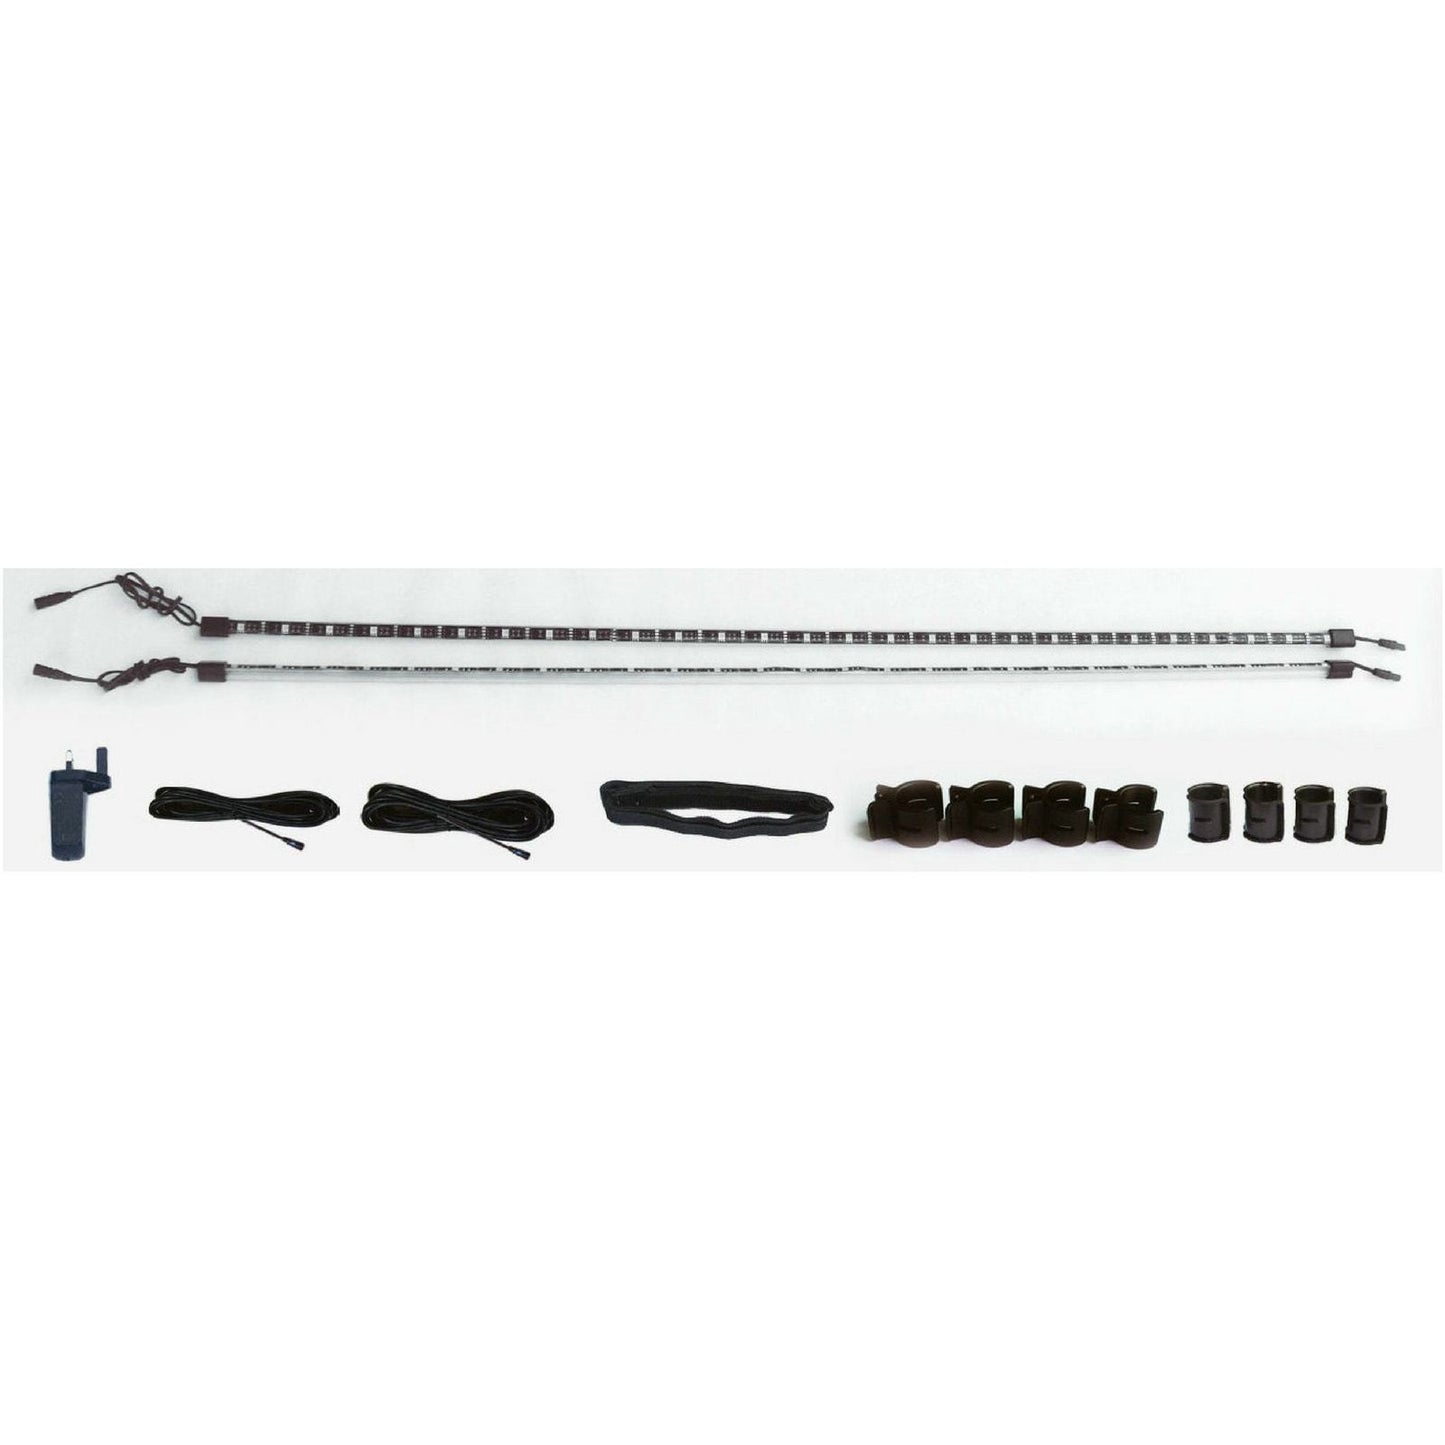 Camptech LED Light Starter Kit - for both inflatable & Traditional Awnings SL5010 (2019) made by CampTech. A Lighting sold by Quality Caravan Awnings